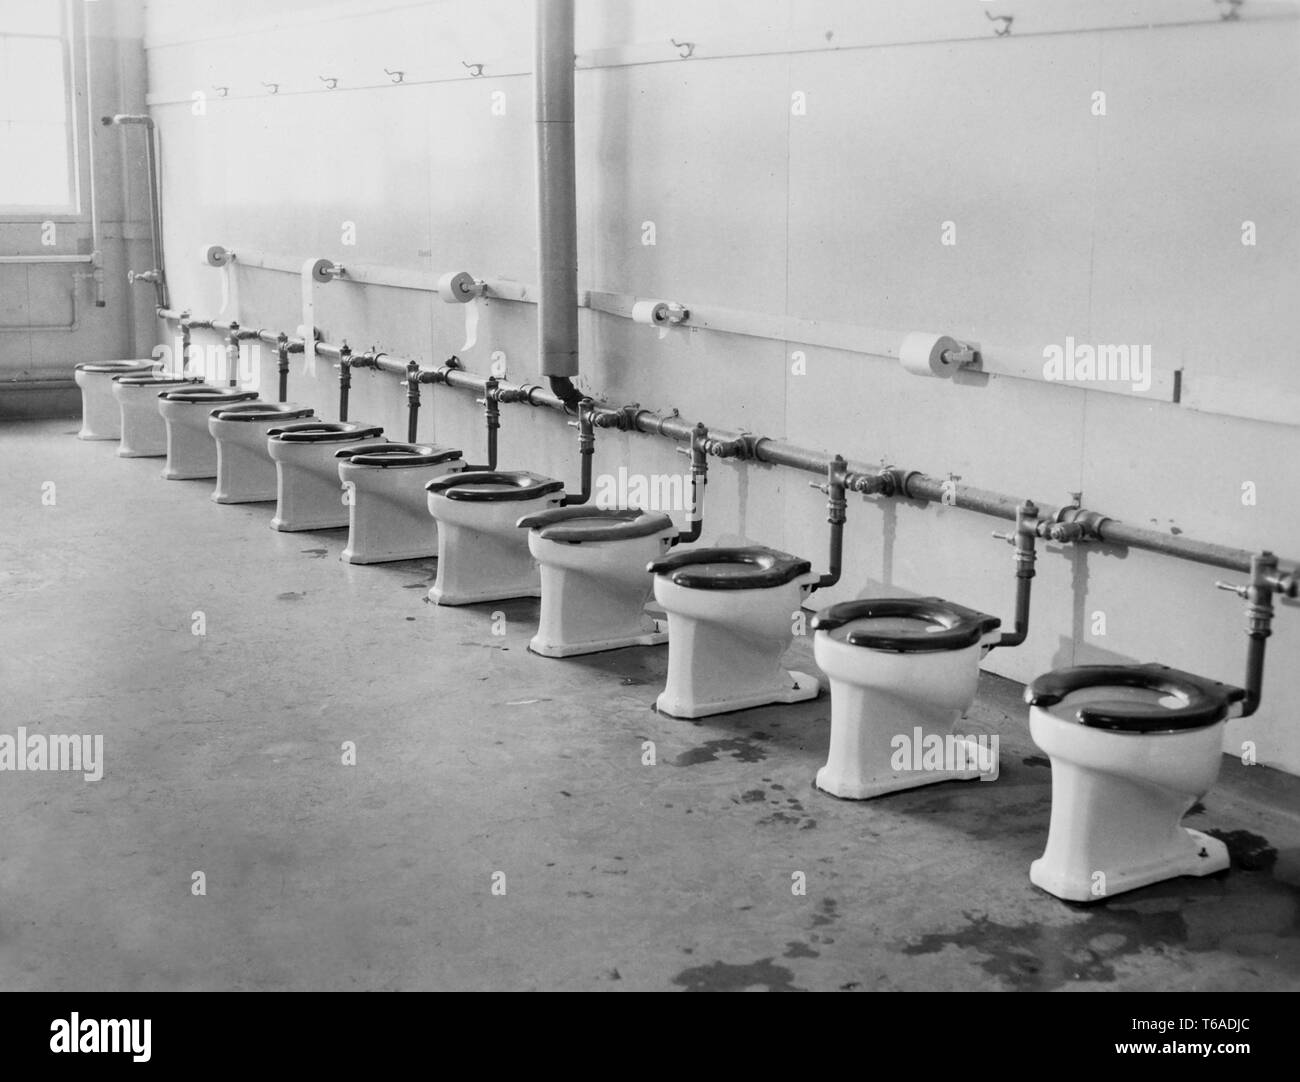 A row of toilets in an Army base in the South Pacific during World War II,  ca. 1943. Stock Photo